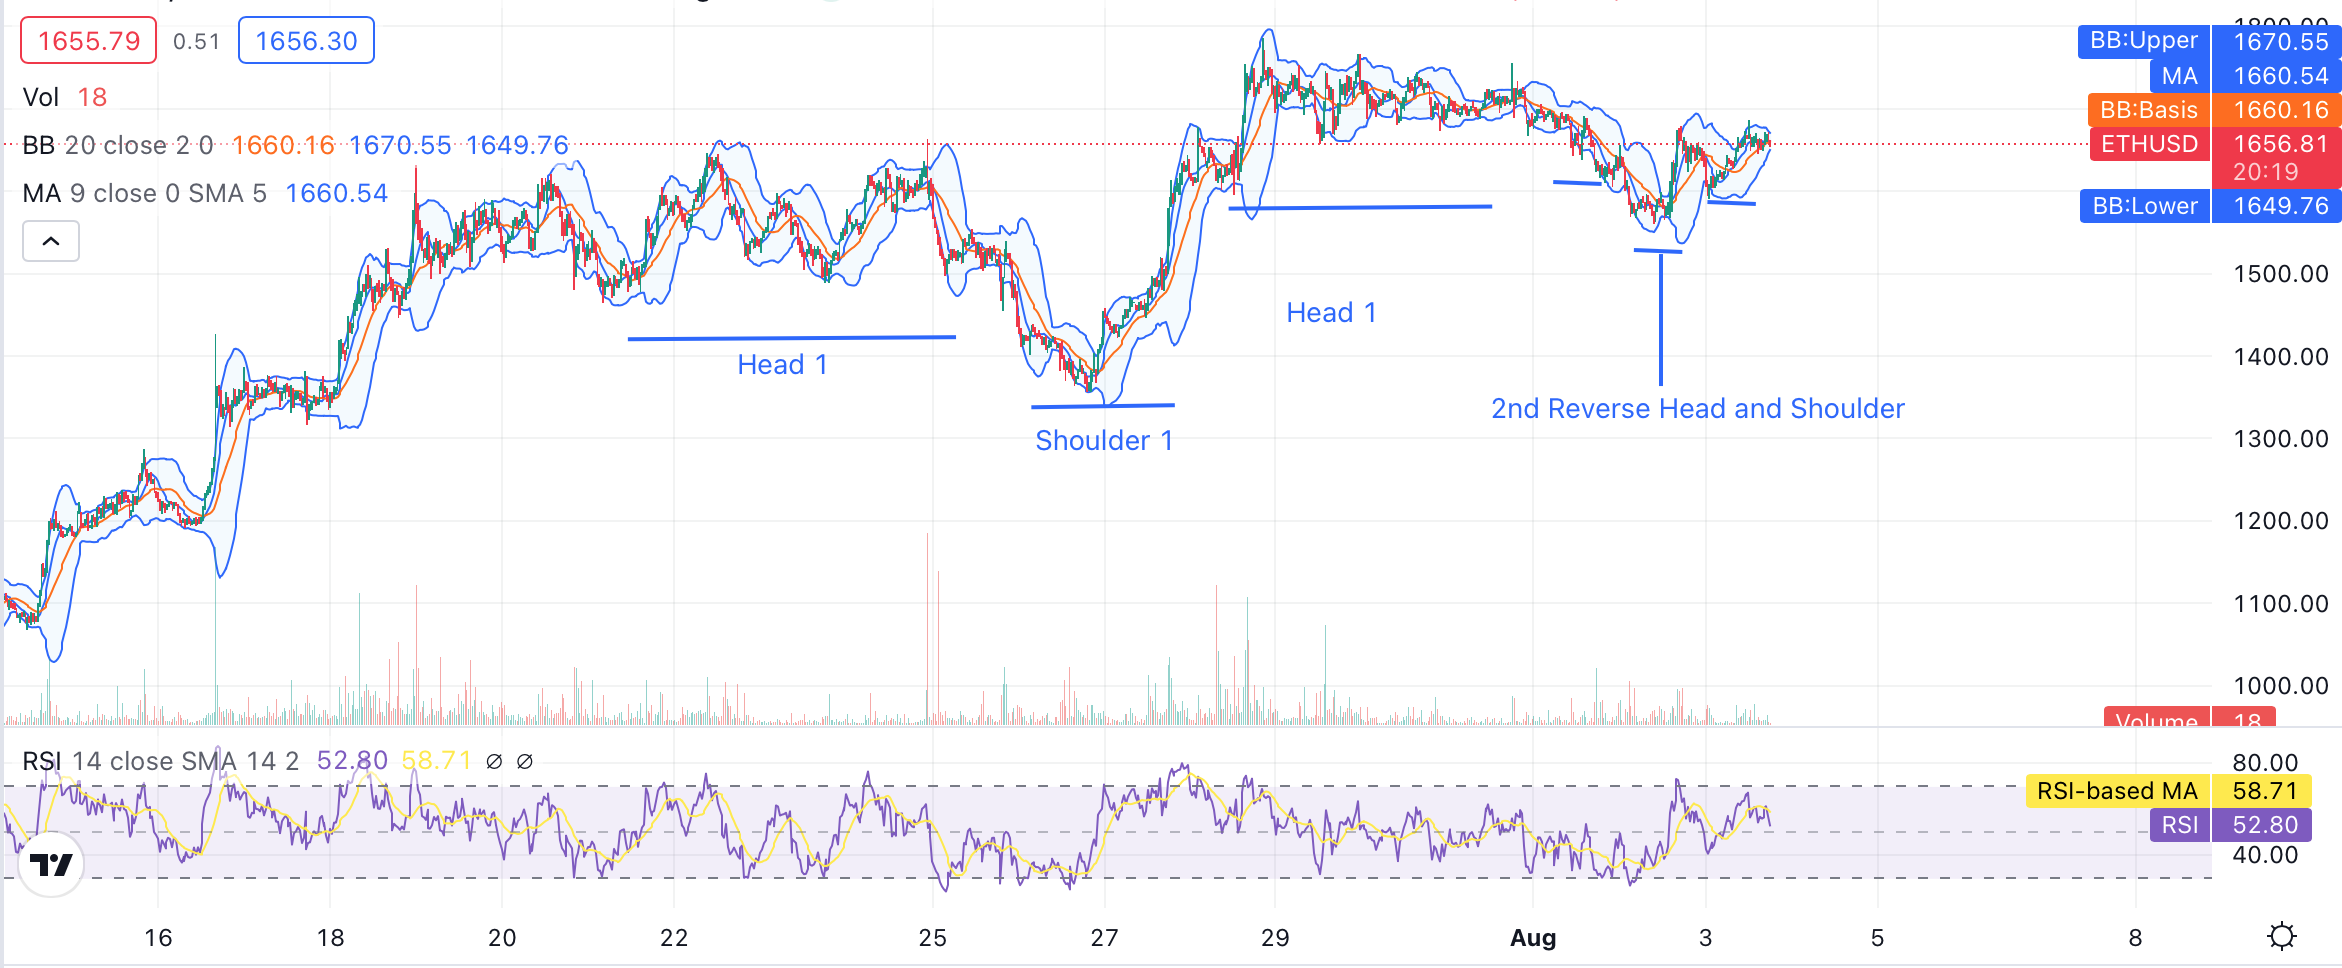 Ethereum price analysis - Reverse Head and Shoulder - 3rd August 2022-